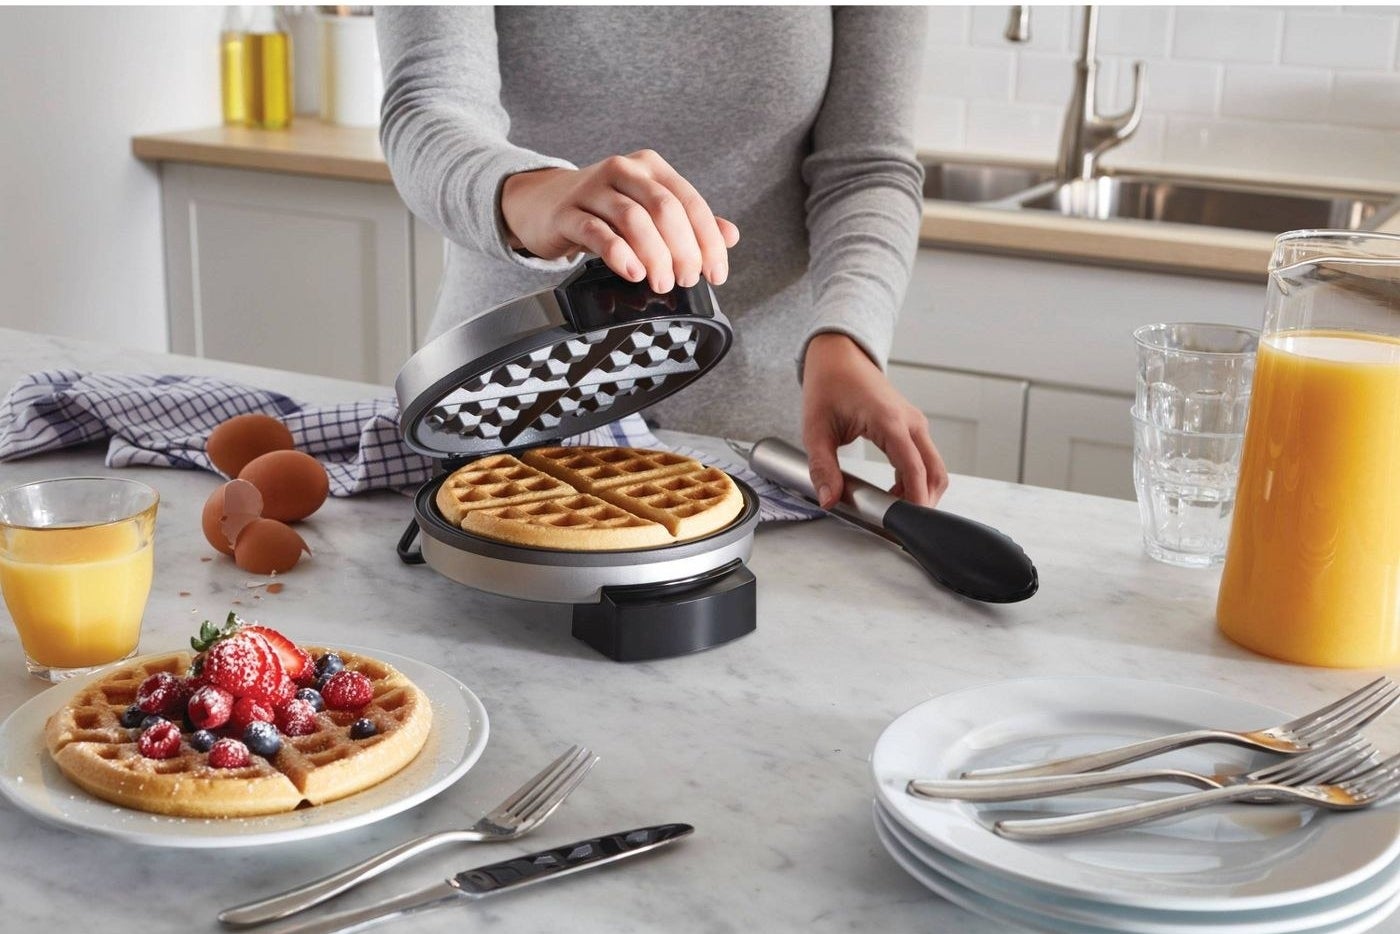 model holding silver waffle maker with waffle inside next to a waffle on a plate